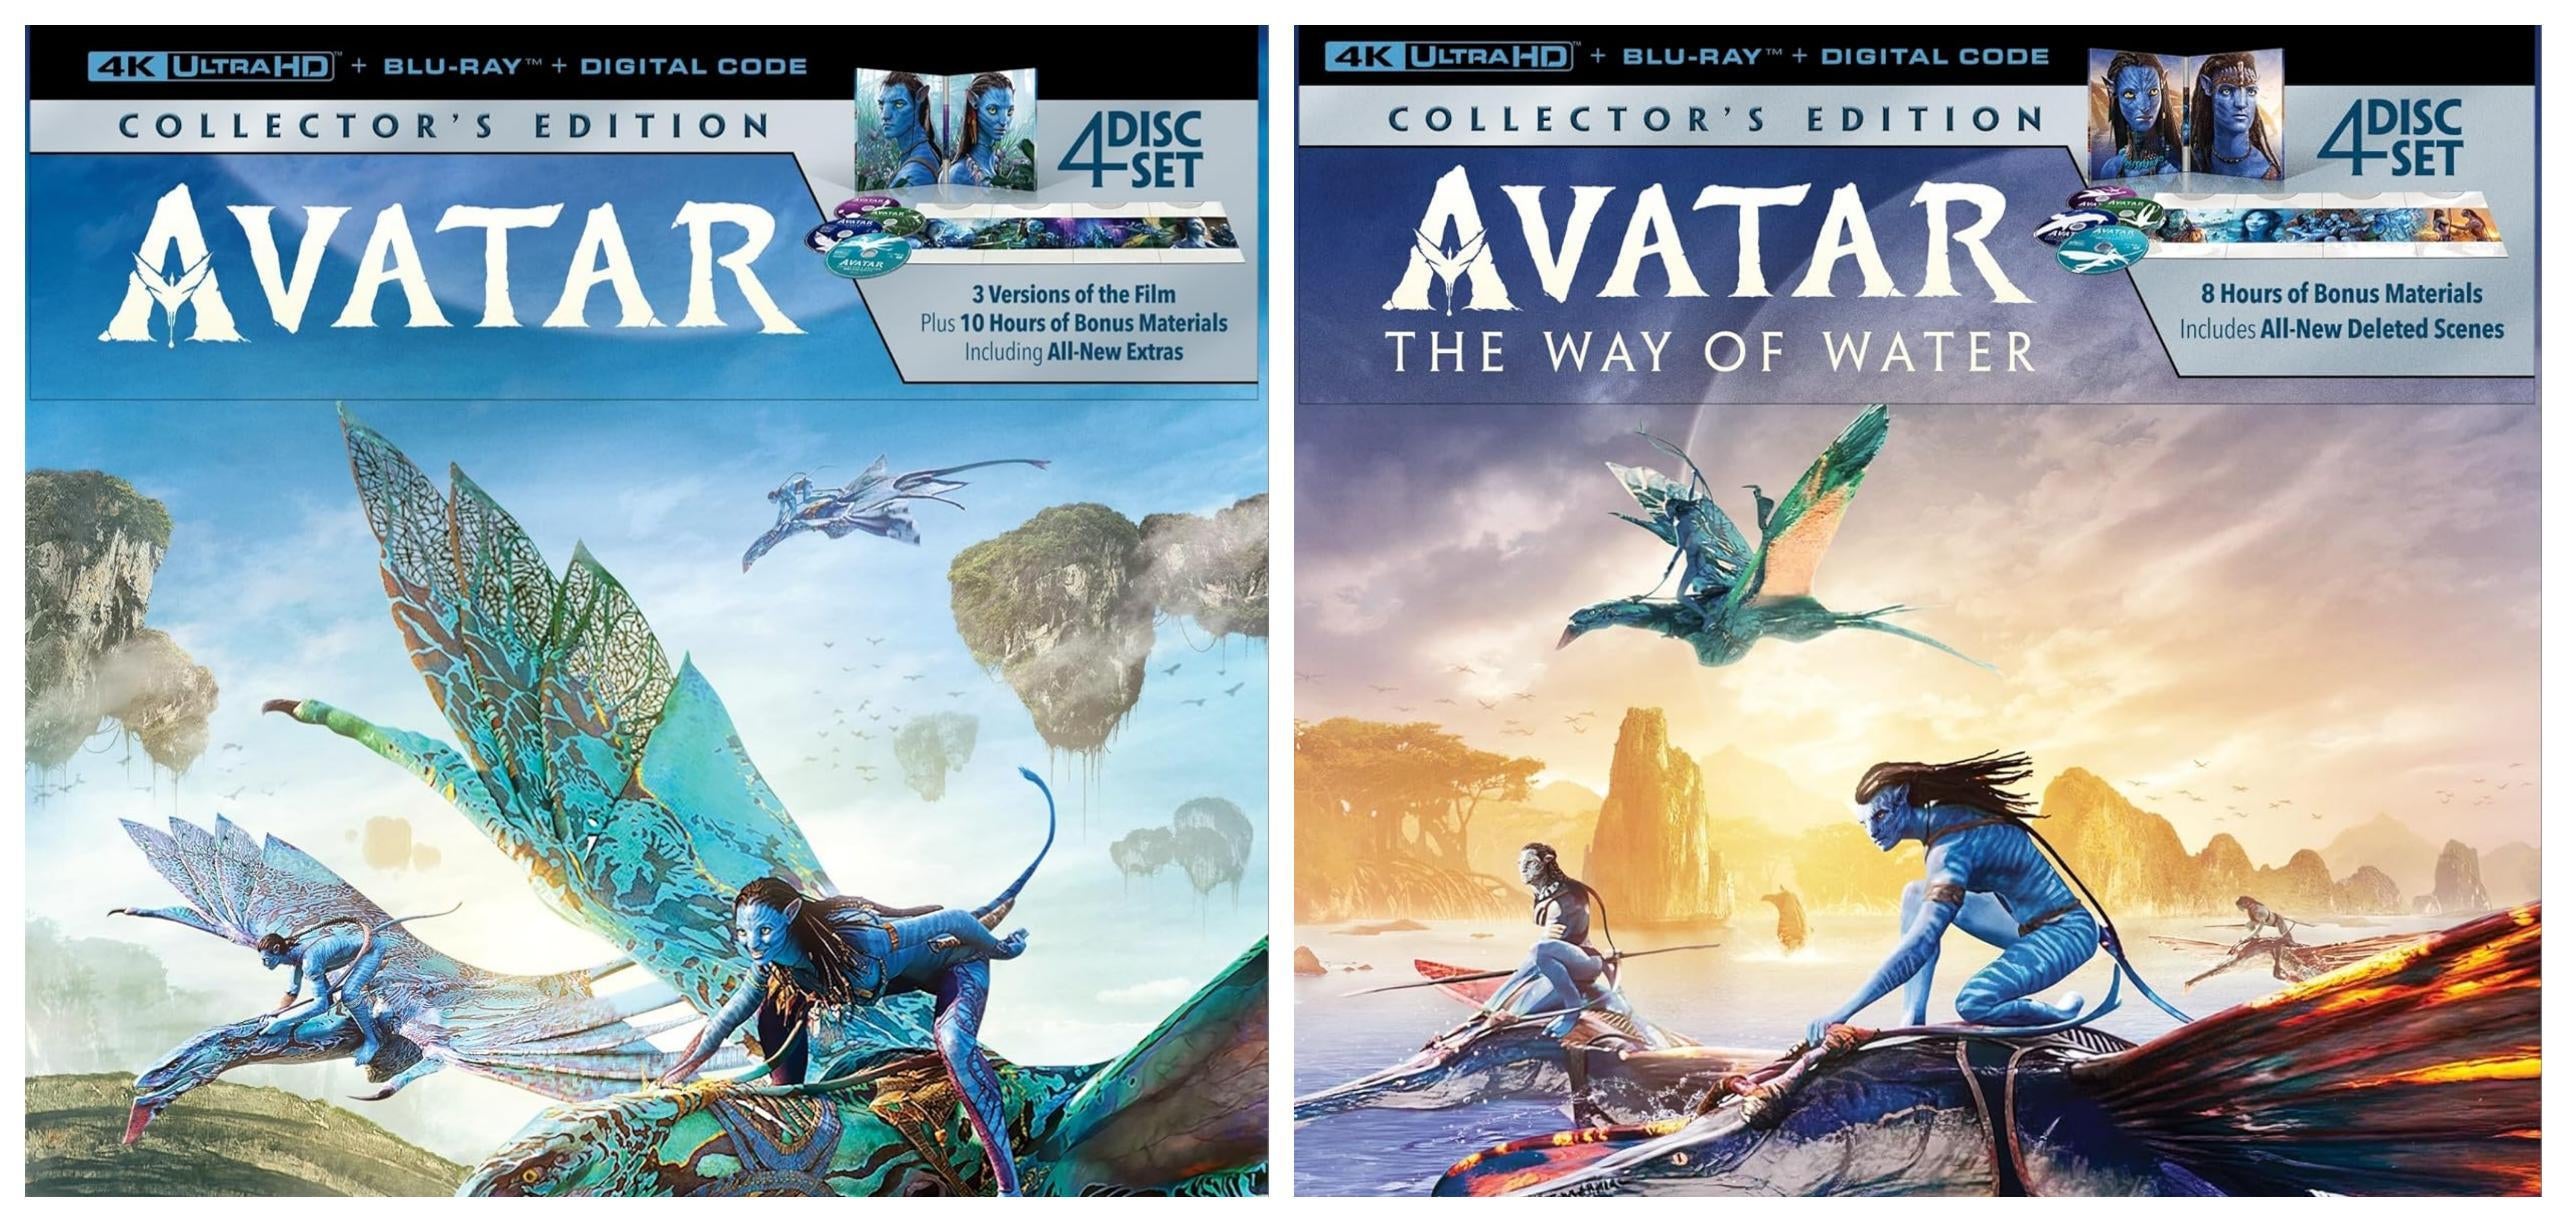 The Original Avatar and Avatar: The Way of Water Get 4K Blu-ray